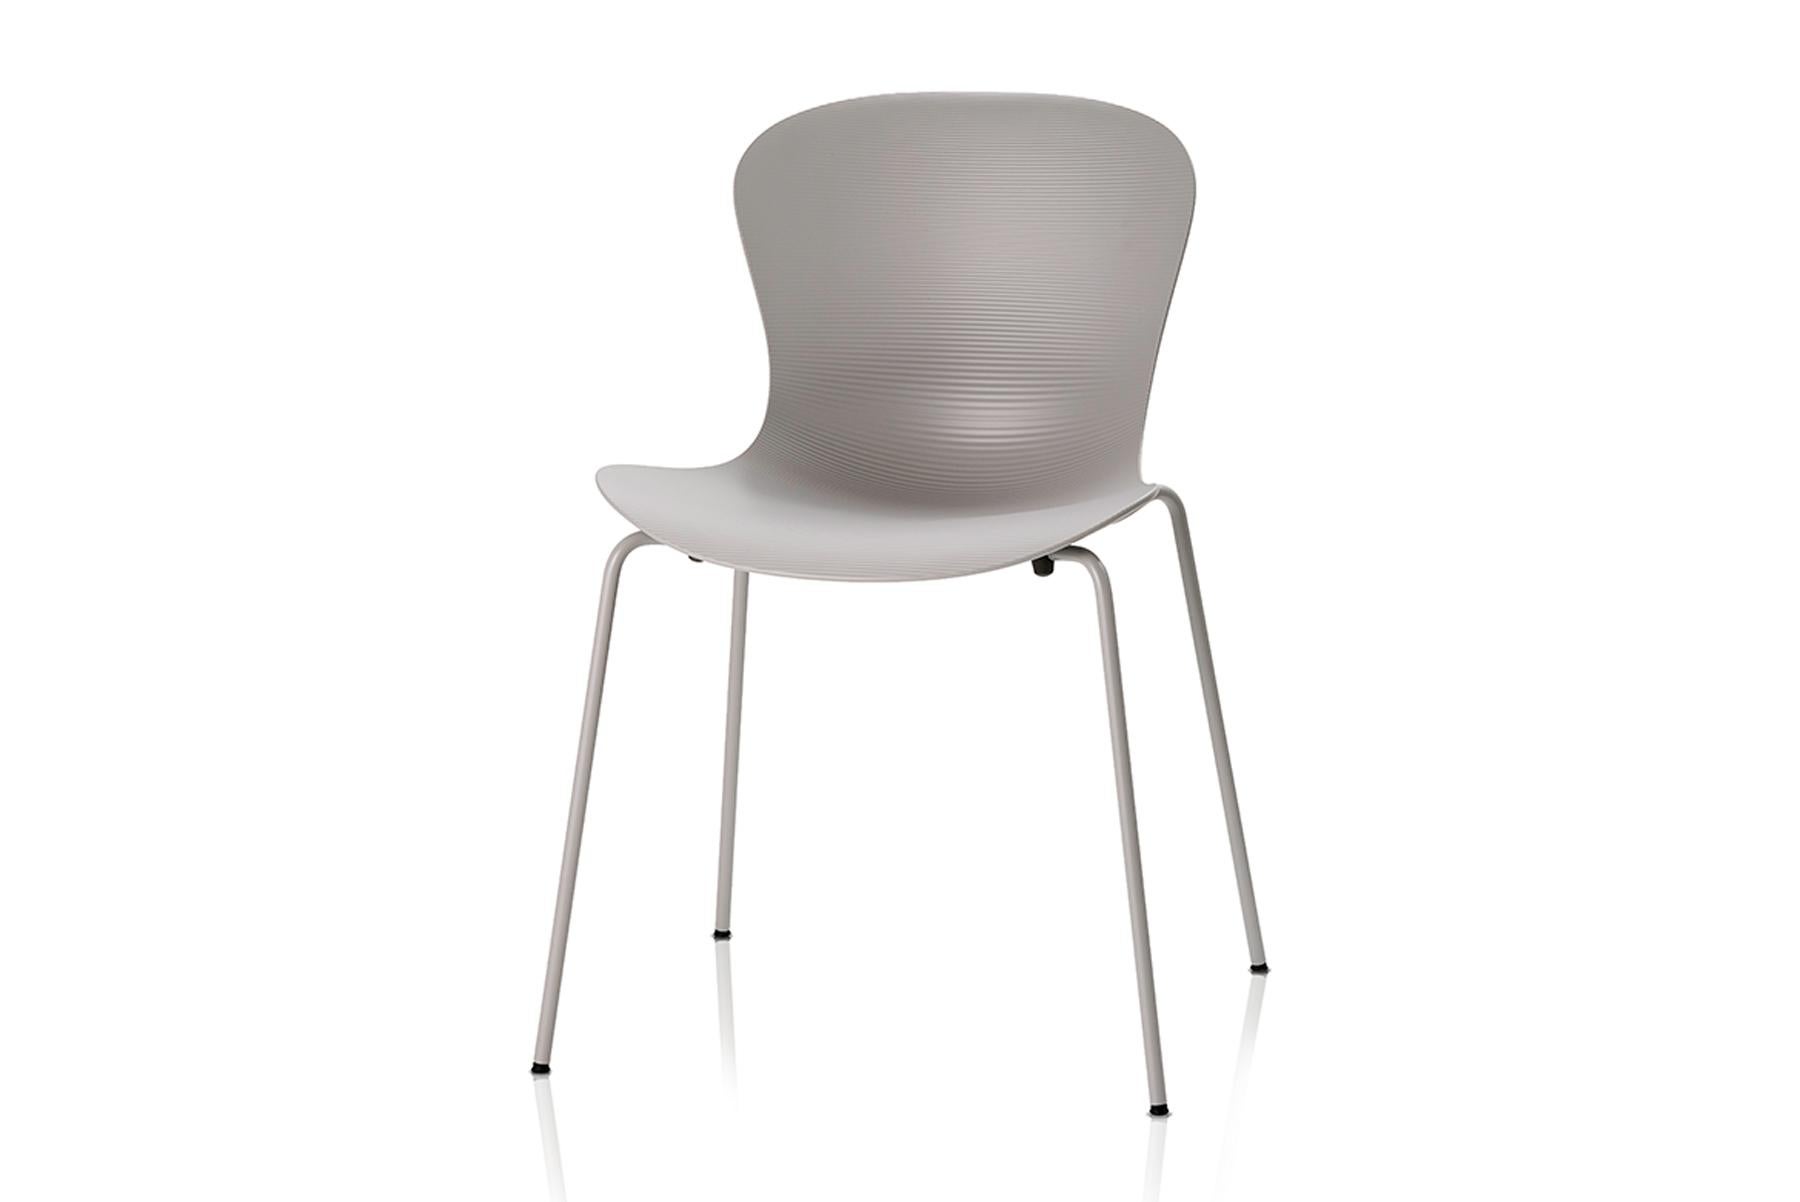 NAP comes in several varieties: stackable with 4 legs or sled and as bar stool or counter stool, all with and without arms. The chair has a high gloss back, and the front of the shell is matt with ripples to emphasize the geometry of the chair. The